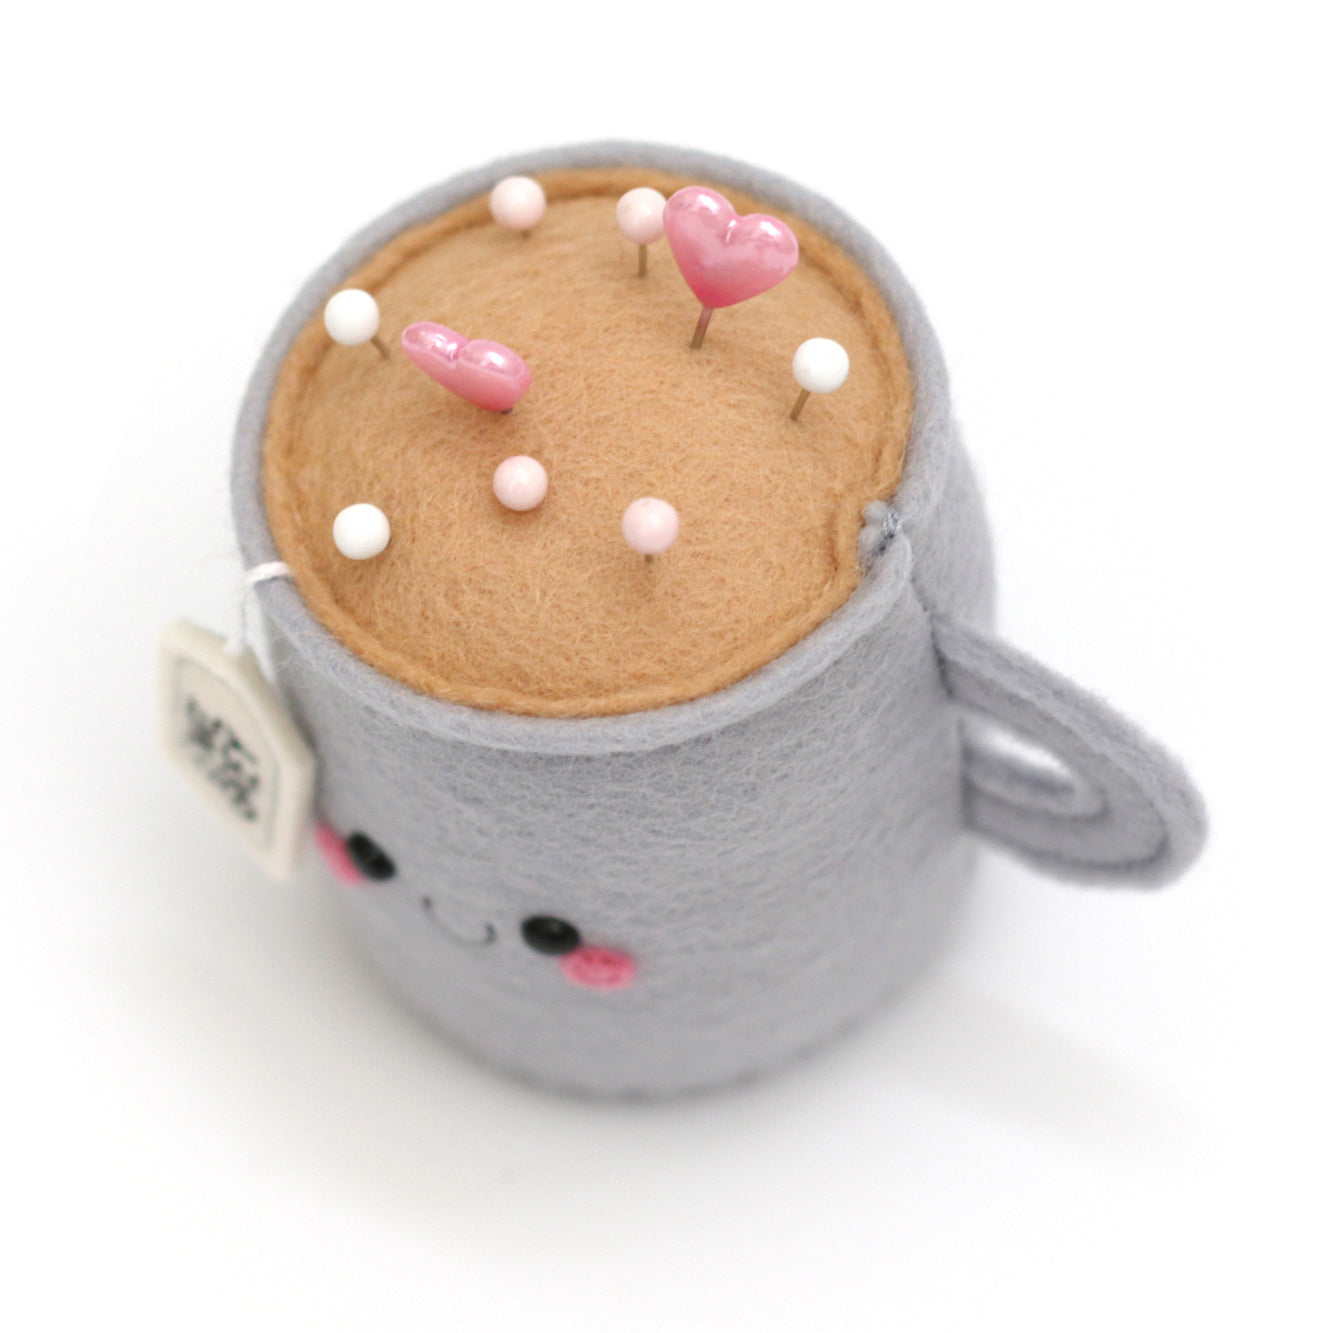 Kawaii Earl Grey Teacup Pincushion by hannahdoodle top view with sewing pins